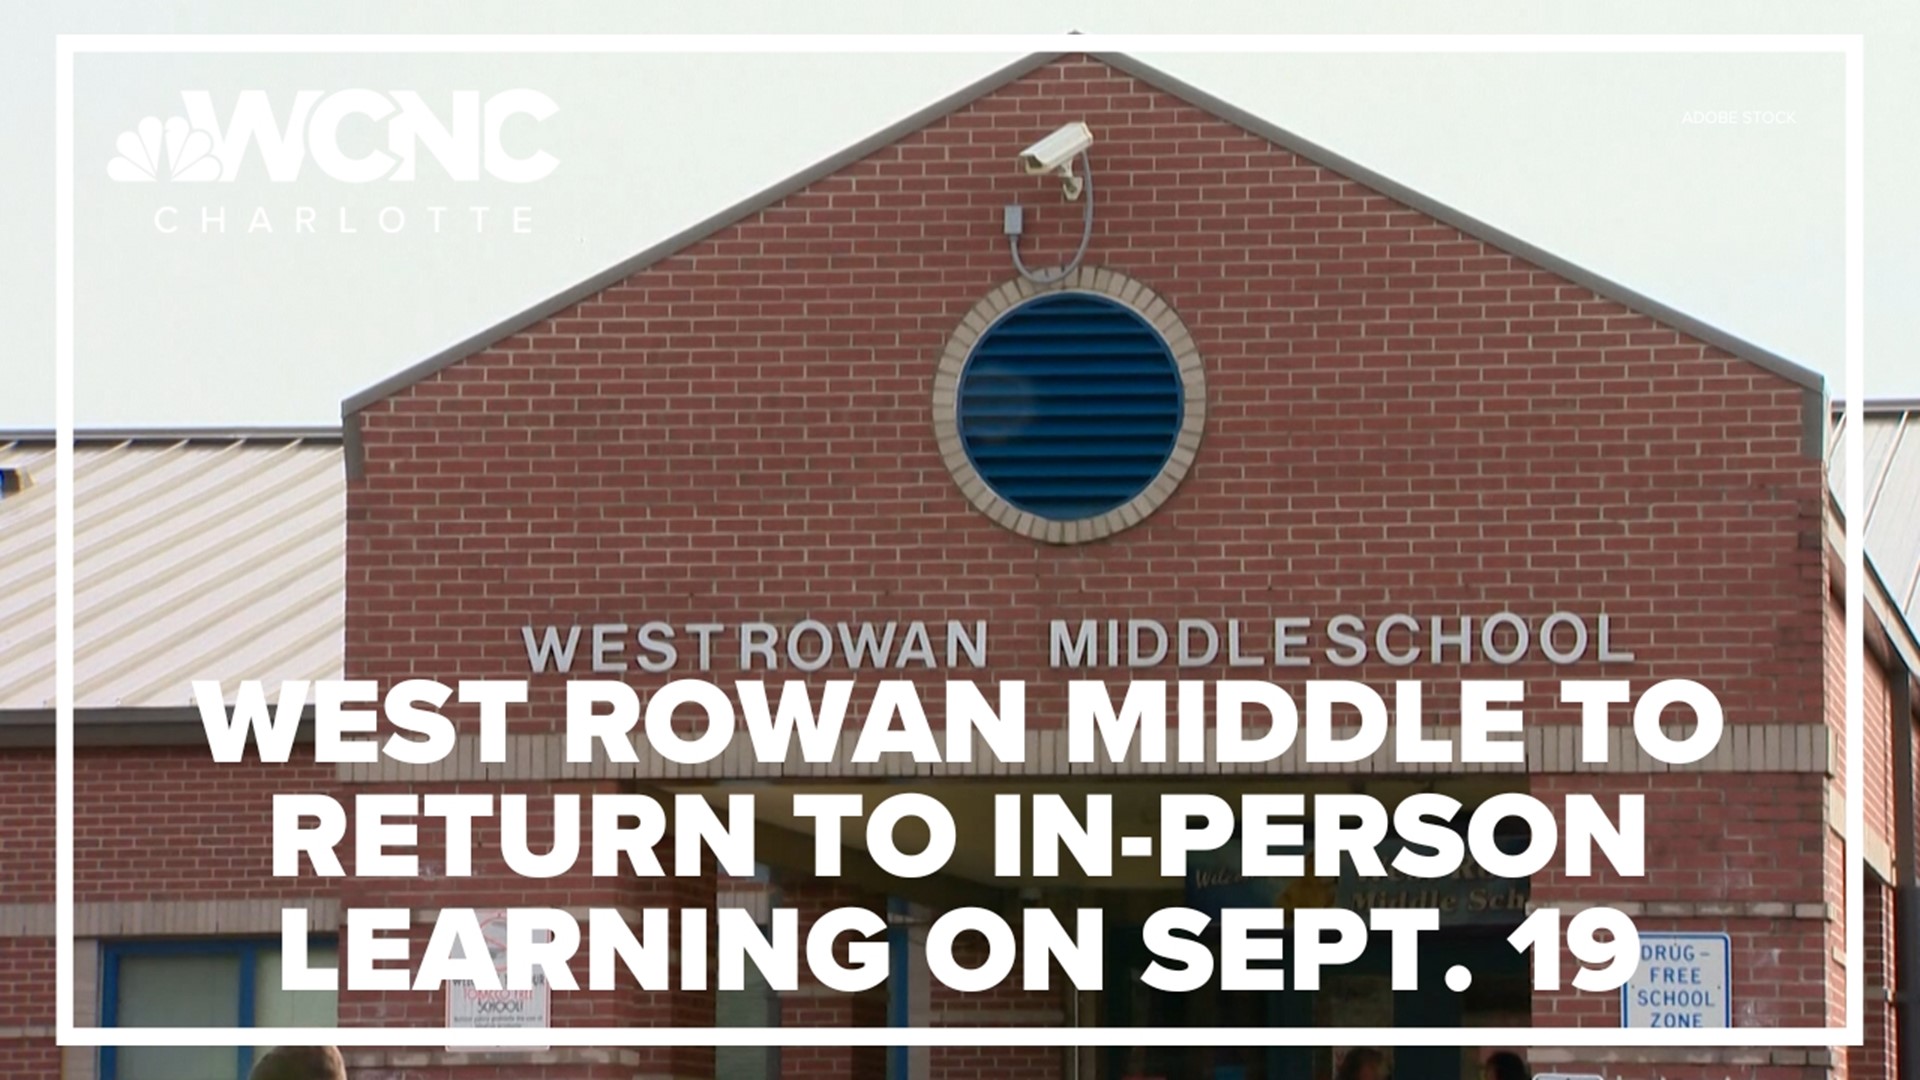 West Rowan Middle will return to in-person learning on Monday, September 19th.